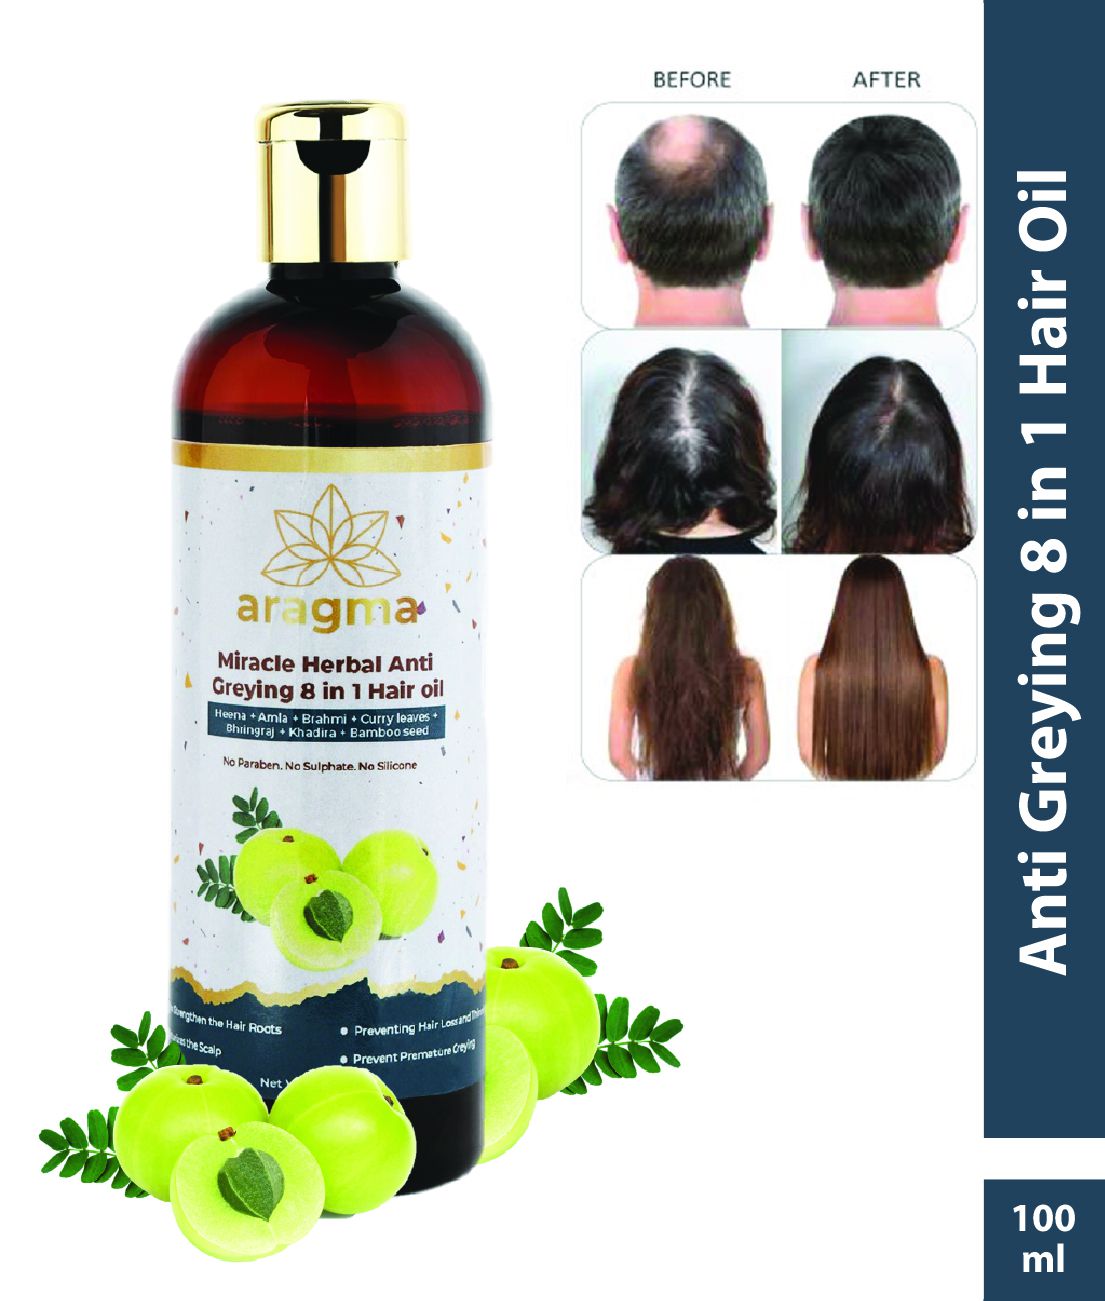 Aragma Miracle Herbal Stop hair loss and hair greying 8 in 1 Hair Oil - No Parabens, Sulphate, Silicones & Color - 100 ml